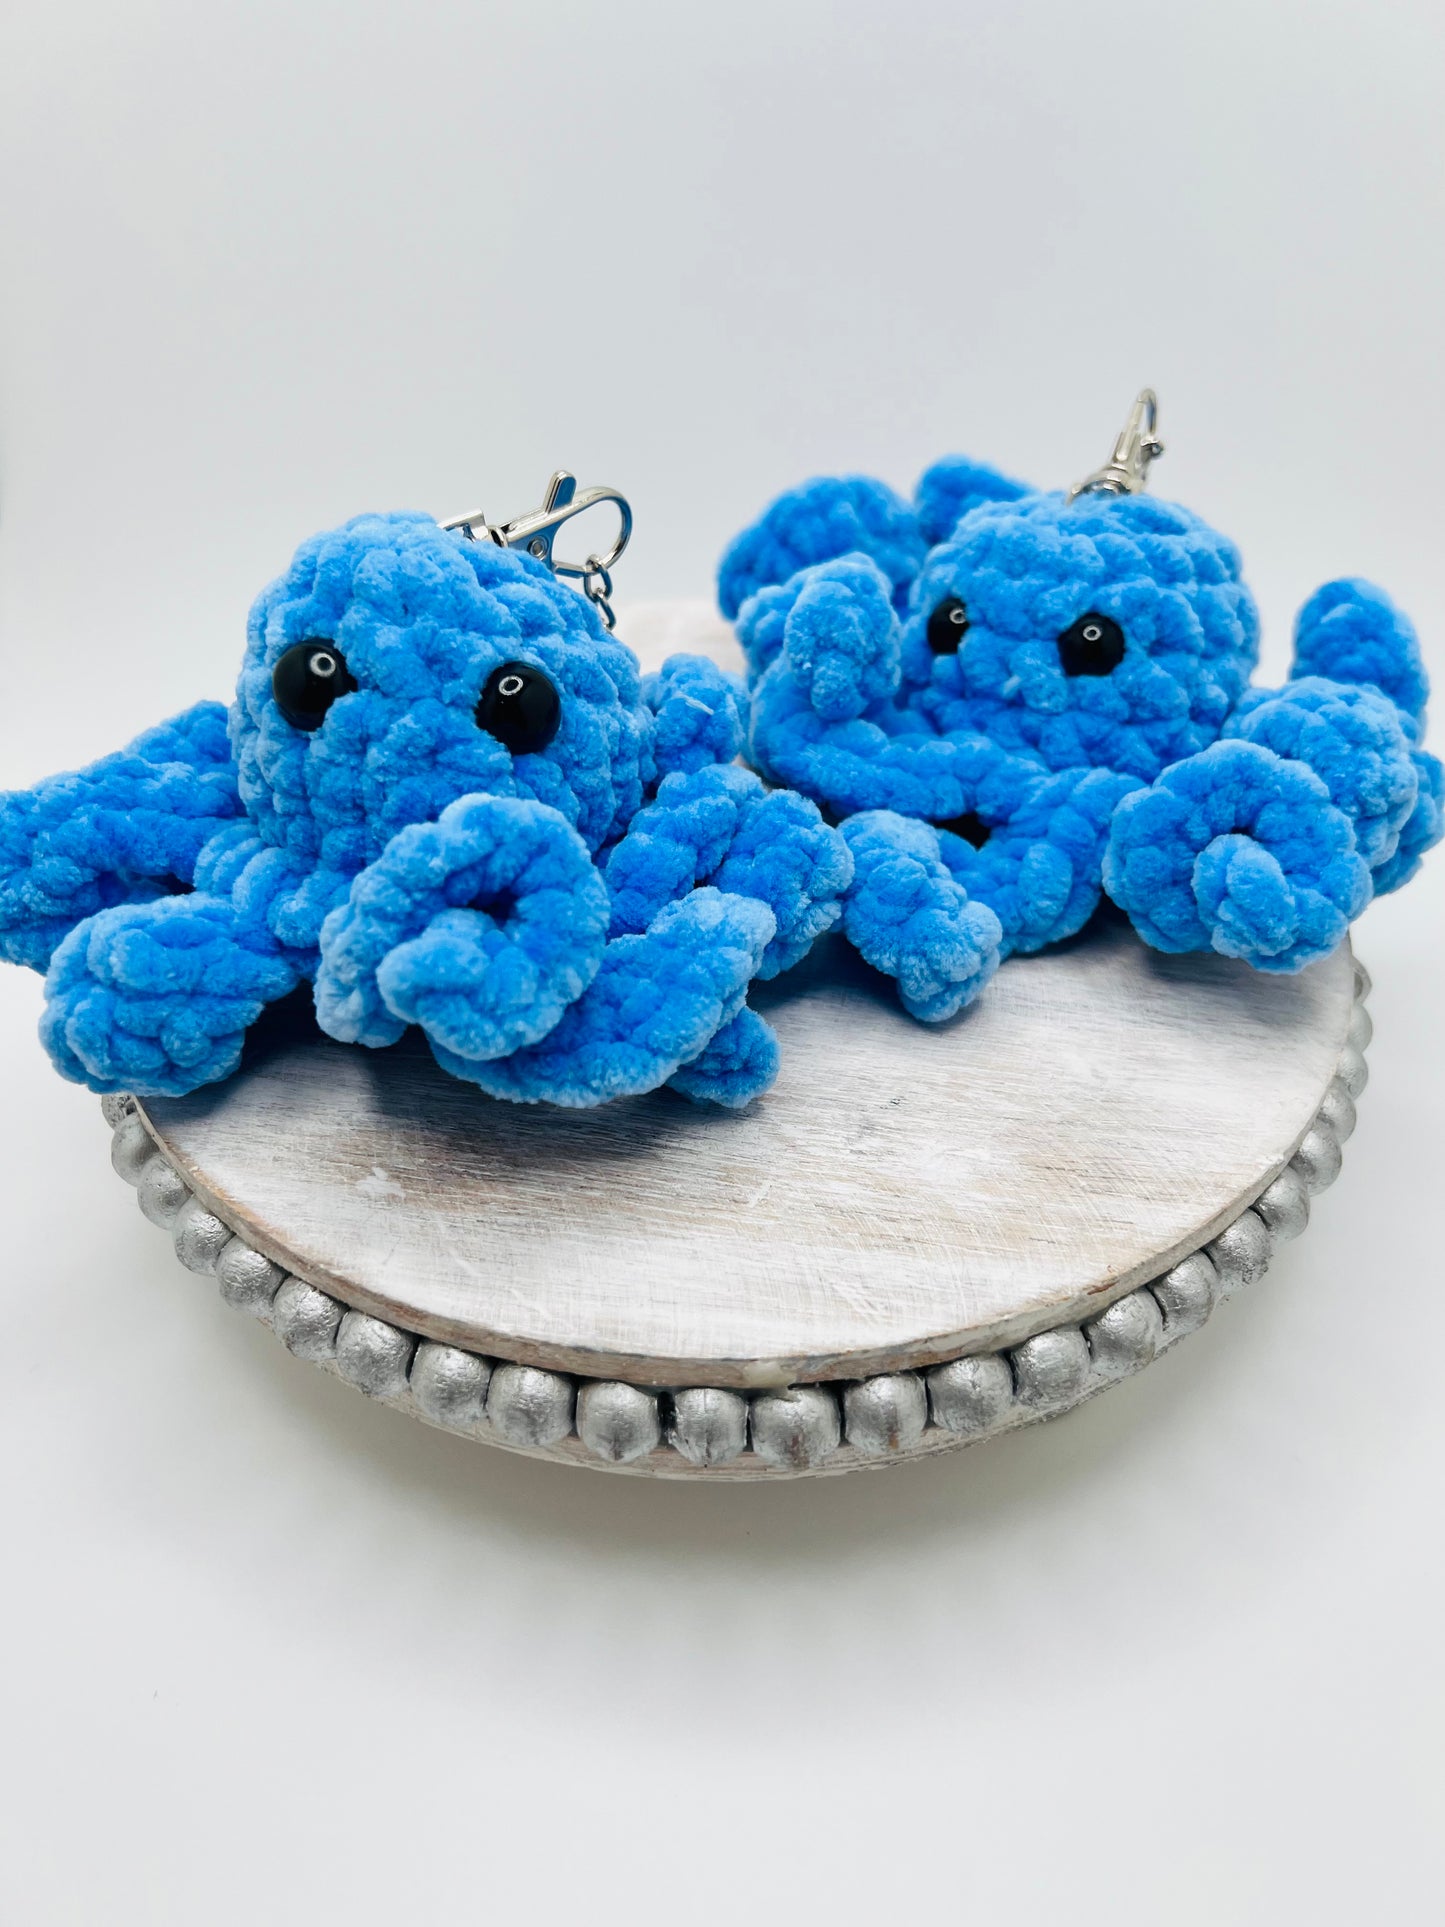 Stuffed Octopus Keychain - Crochet Knitted Amigurumi Toy (Different Colors Available)